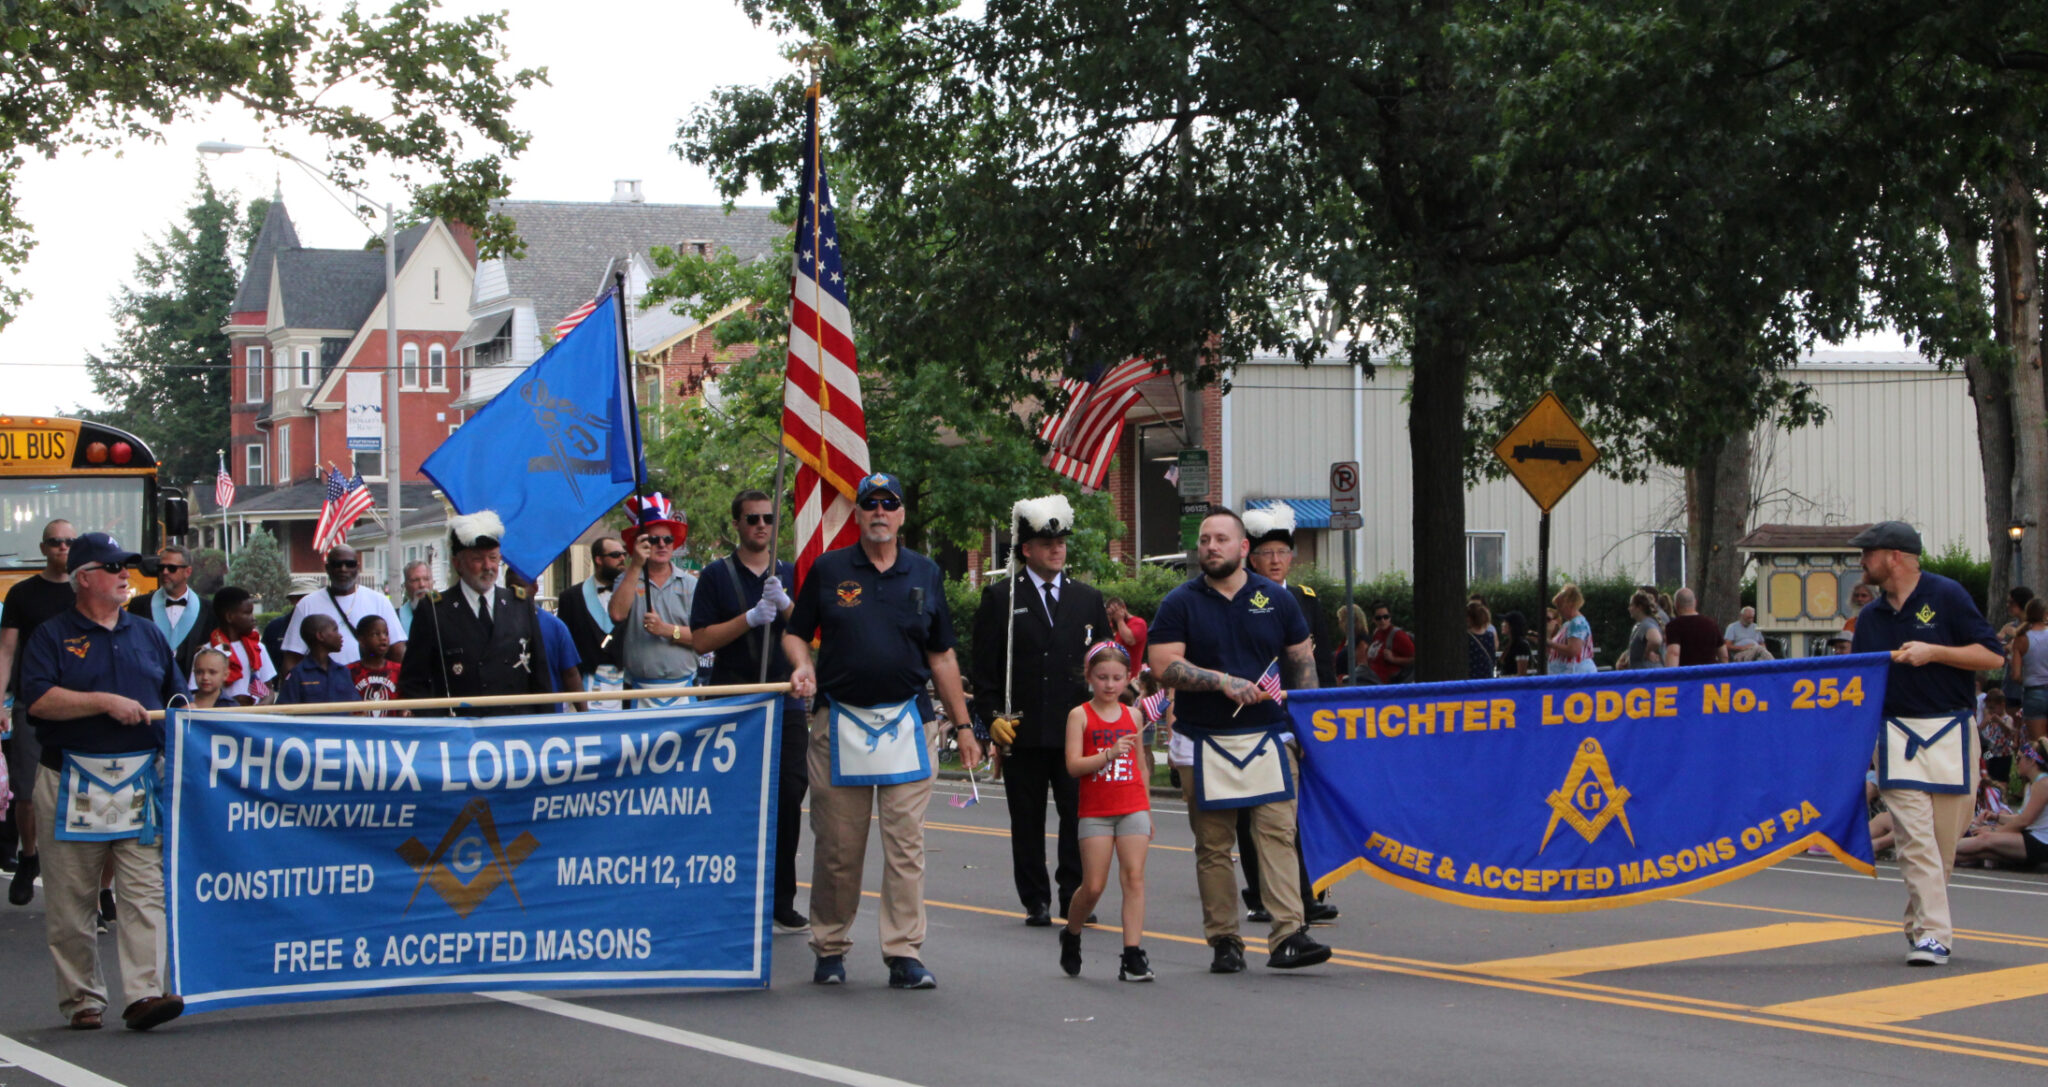 25 Photos, 3 Videos from Pottstown’s Big July 4 Parade